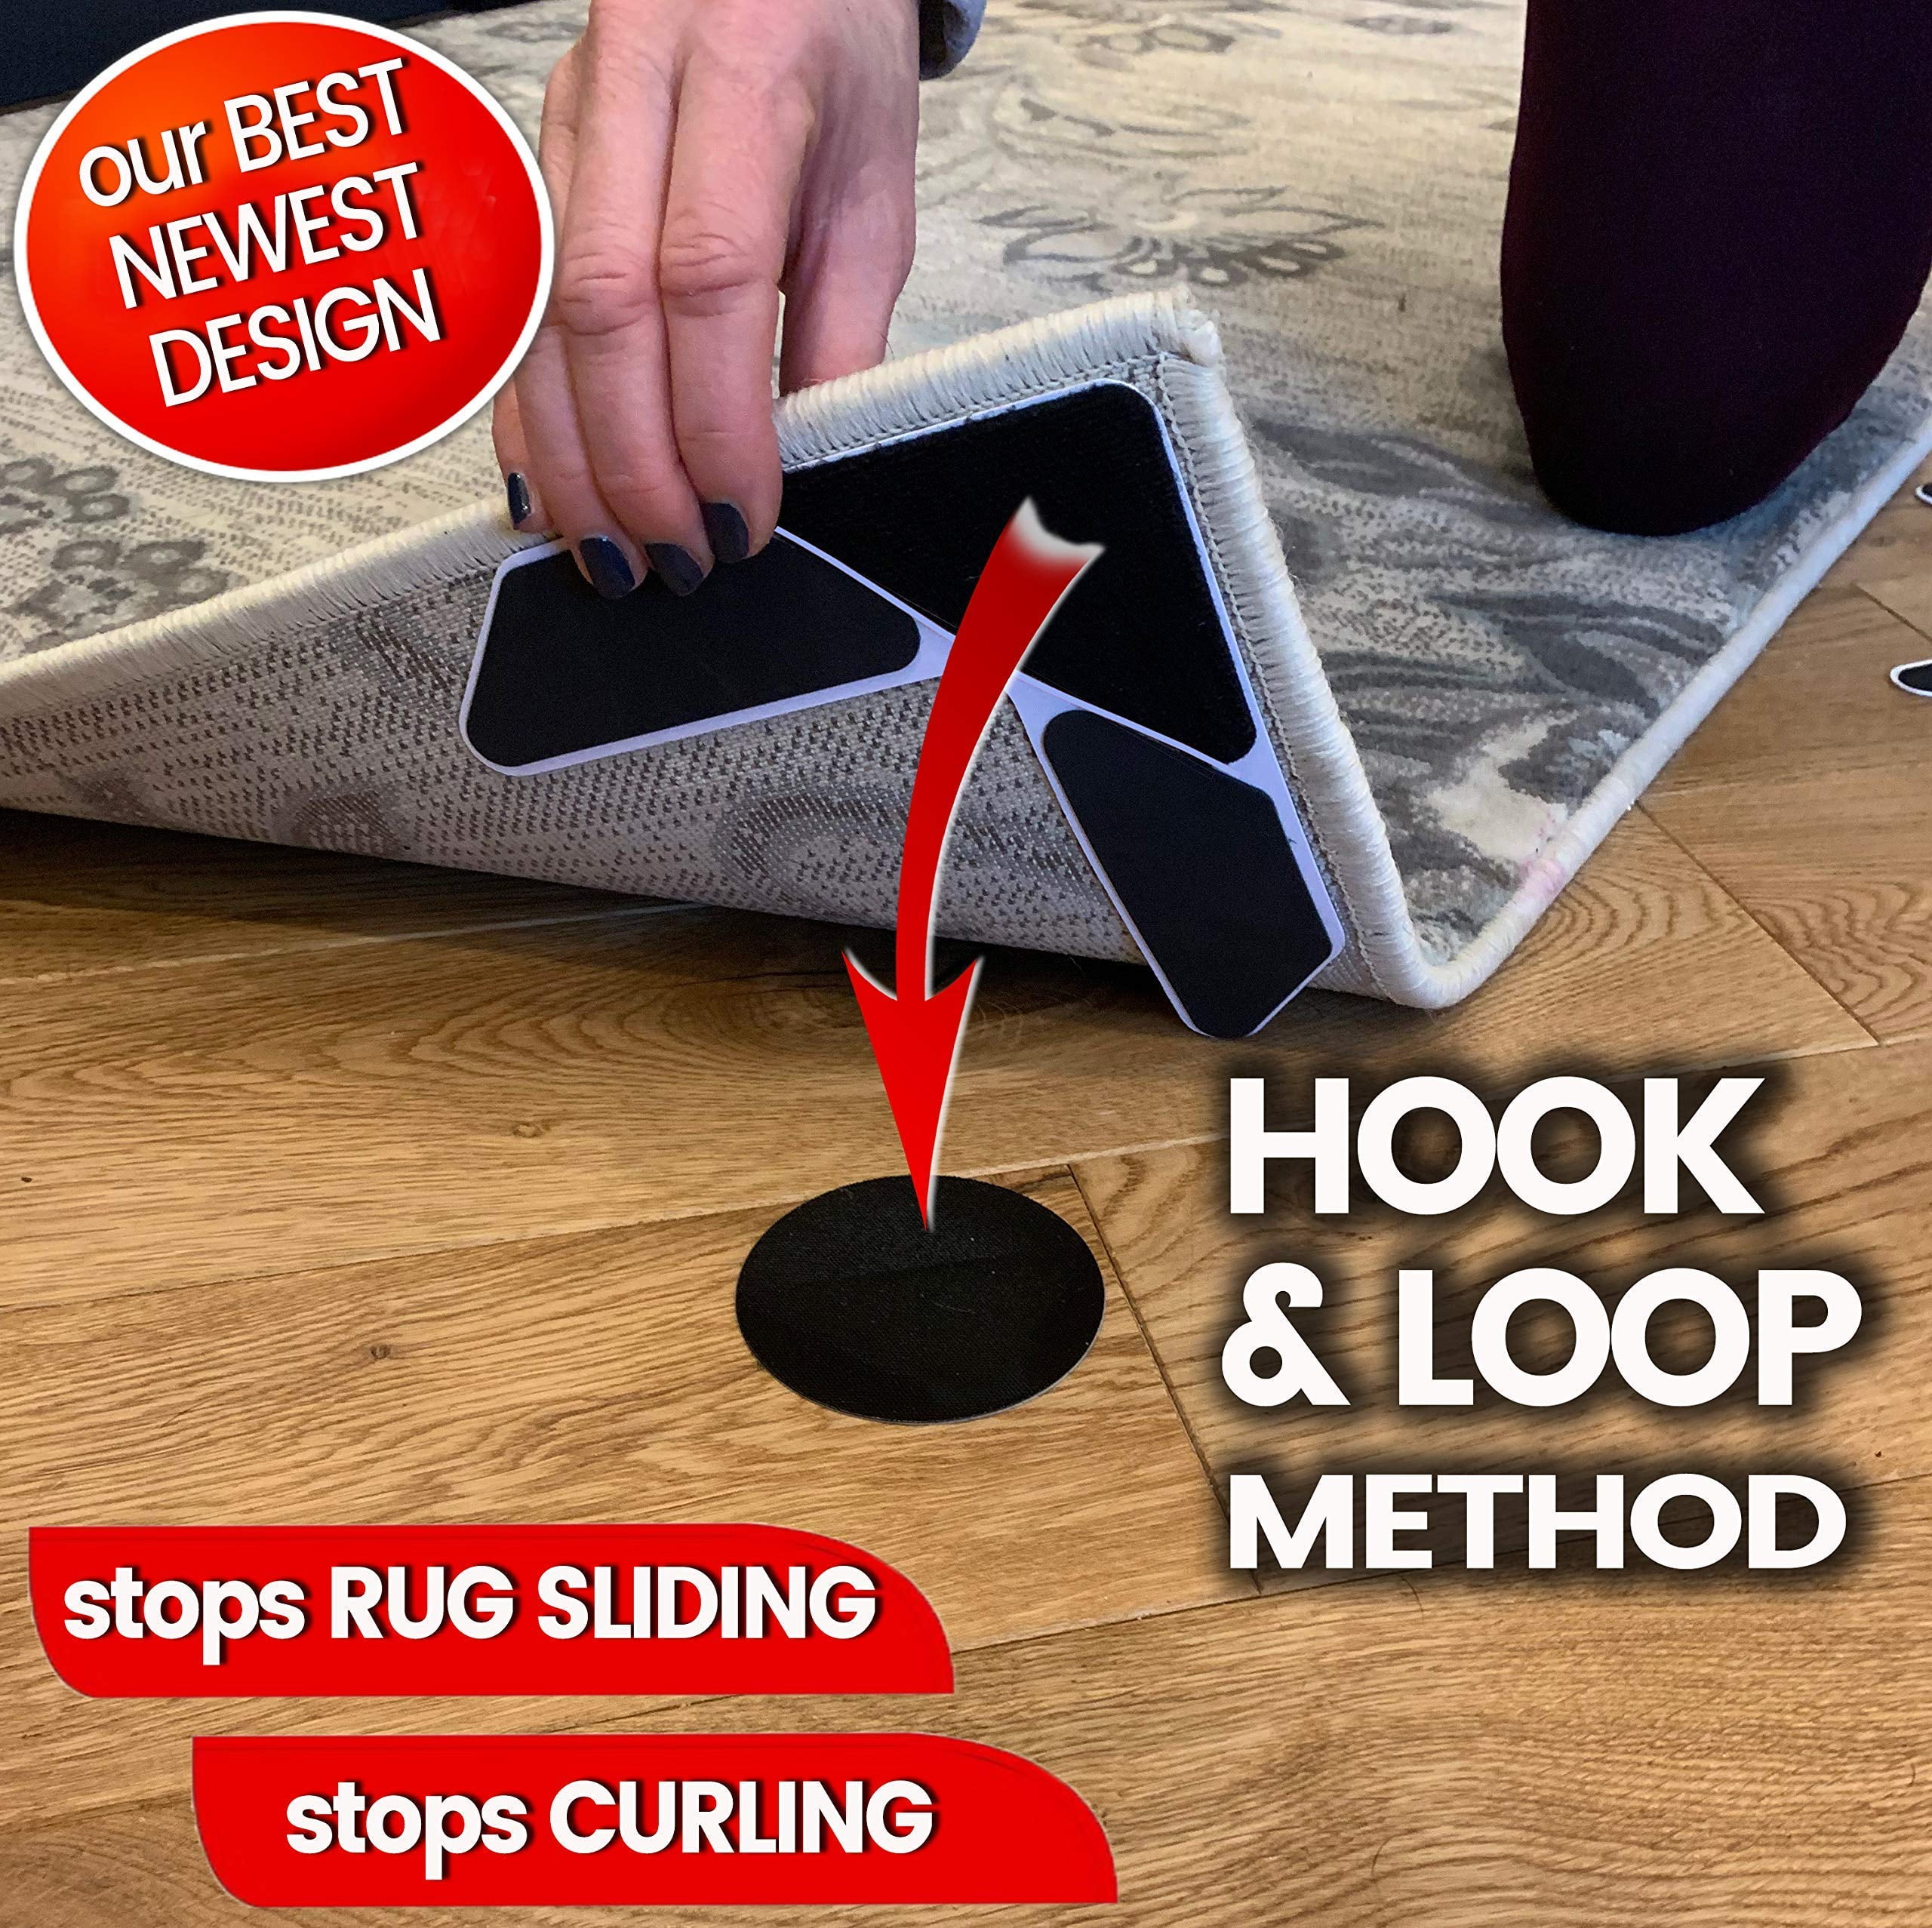  NeverCurl 4pk Rug Corner Grippers - Instantly Flattens Rug  Corners To Hold Rug Down, Stiff Layer Prevent Curling, Renewable Carpet  Gripper Sticky Gel, Easy Lift Design to Clean Under Rugs, Carpet